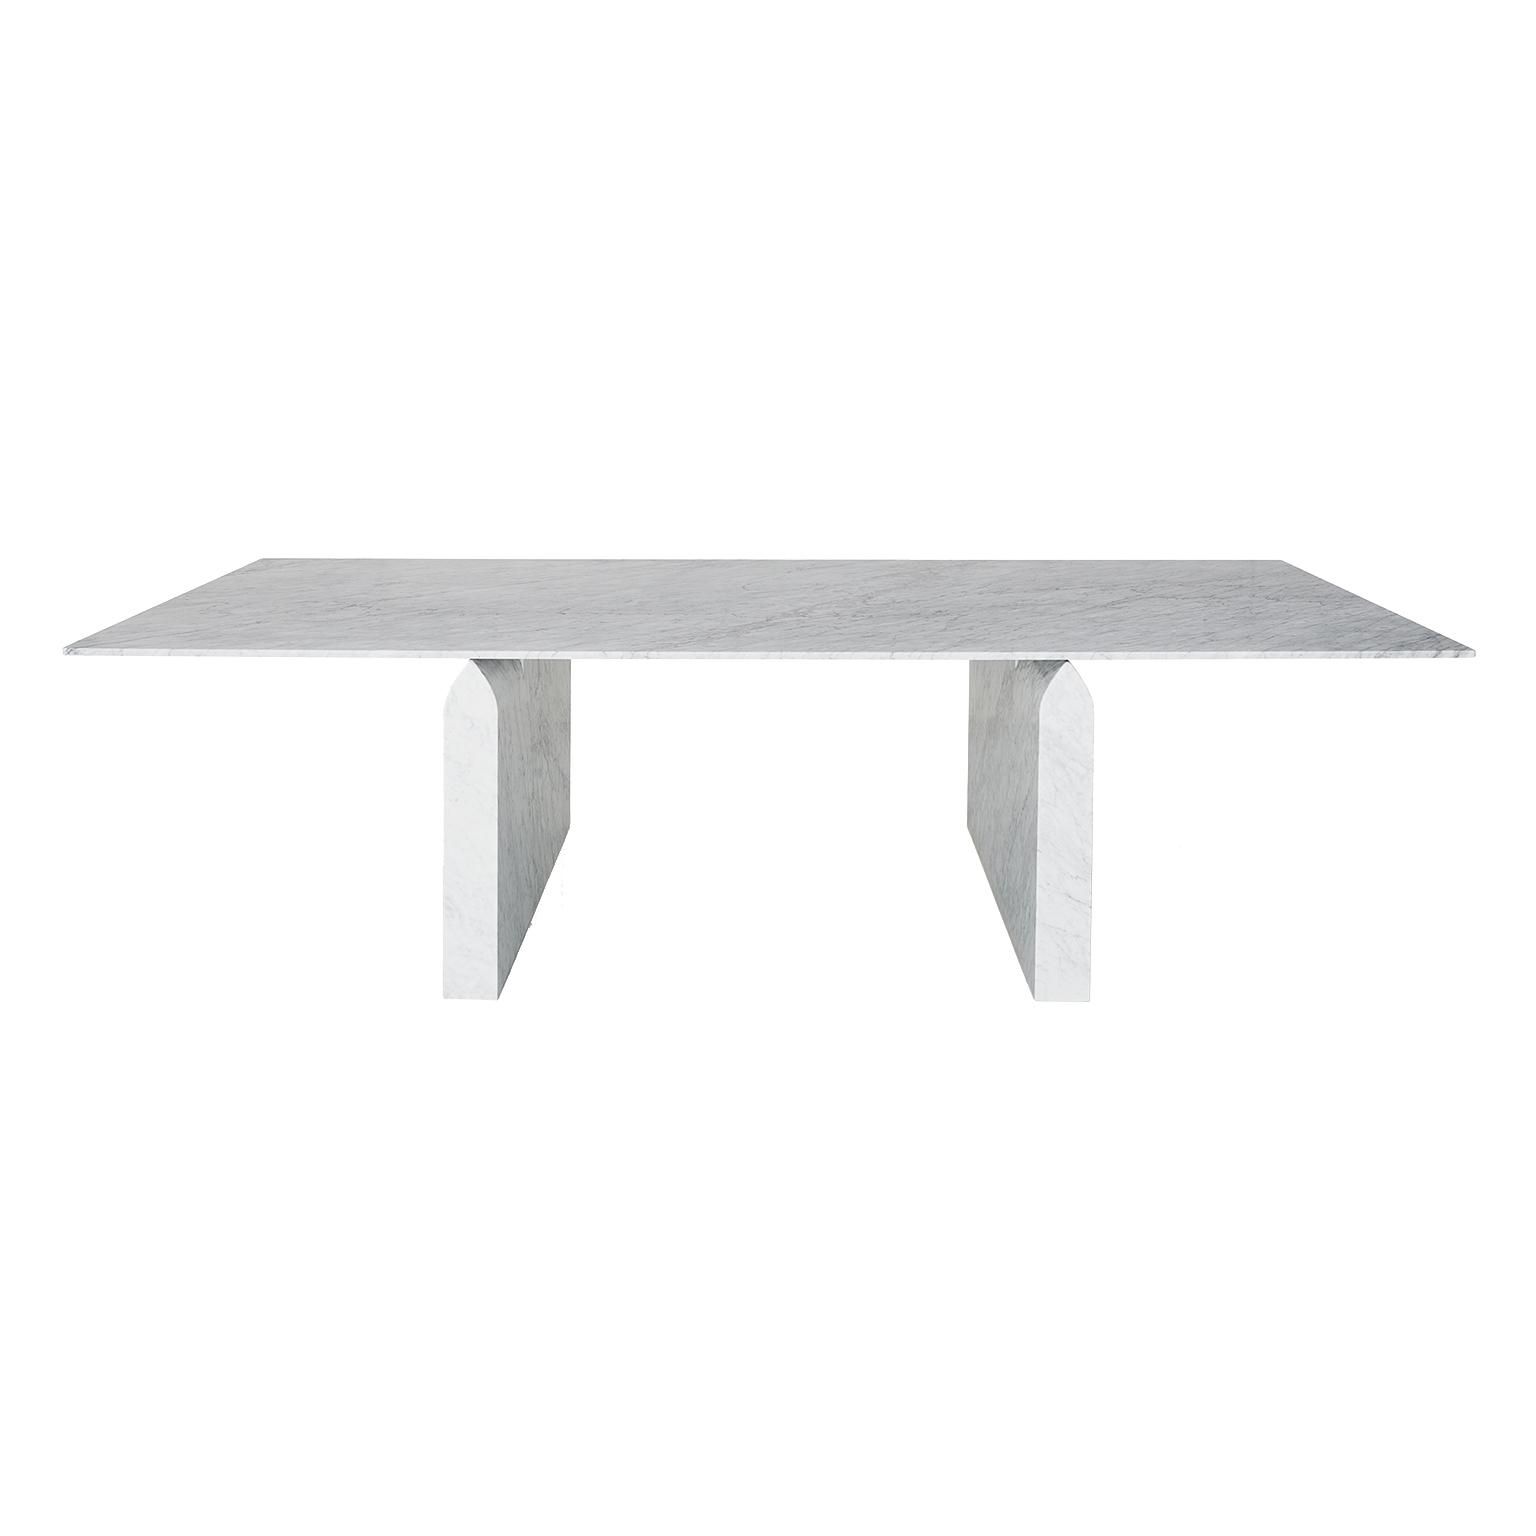 Dj Round Tablejorge L. Cruzata For Siglo Moderno For Sale At 1stdibs Pertaining To Elke Glass Console Tables With Polished Aluminum Base (Photo 28 of 30)